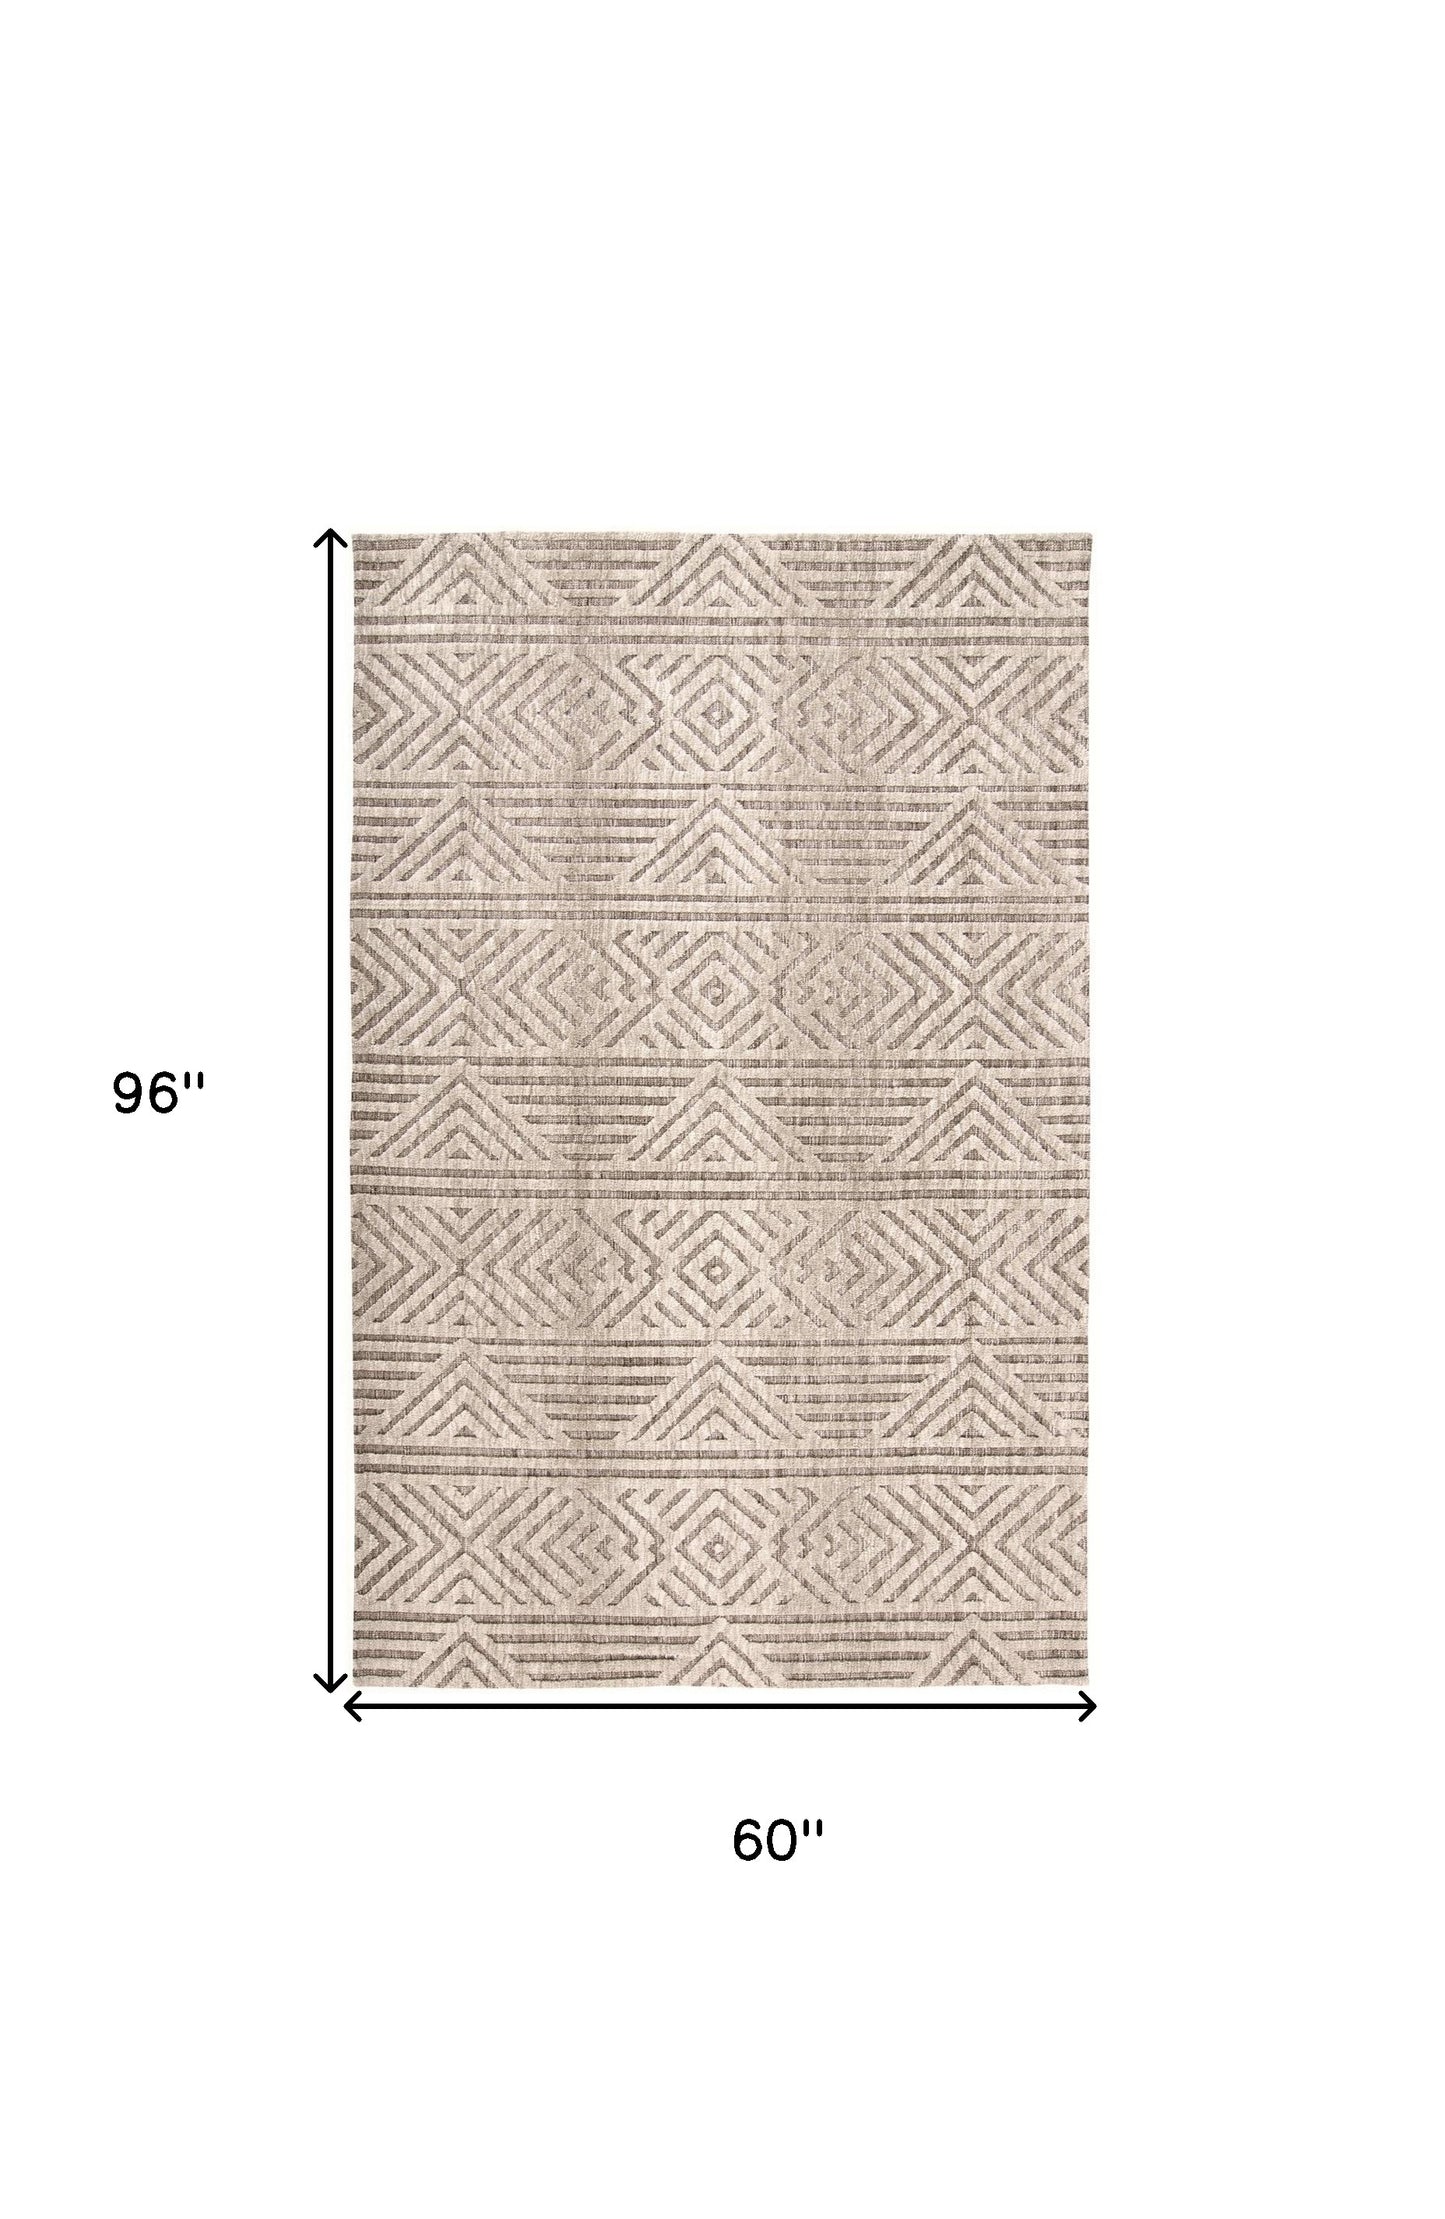 5' X 8' Tan Ivory And Brown Geometric Stain Resistant Area Rug